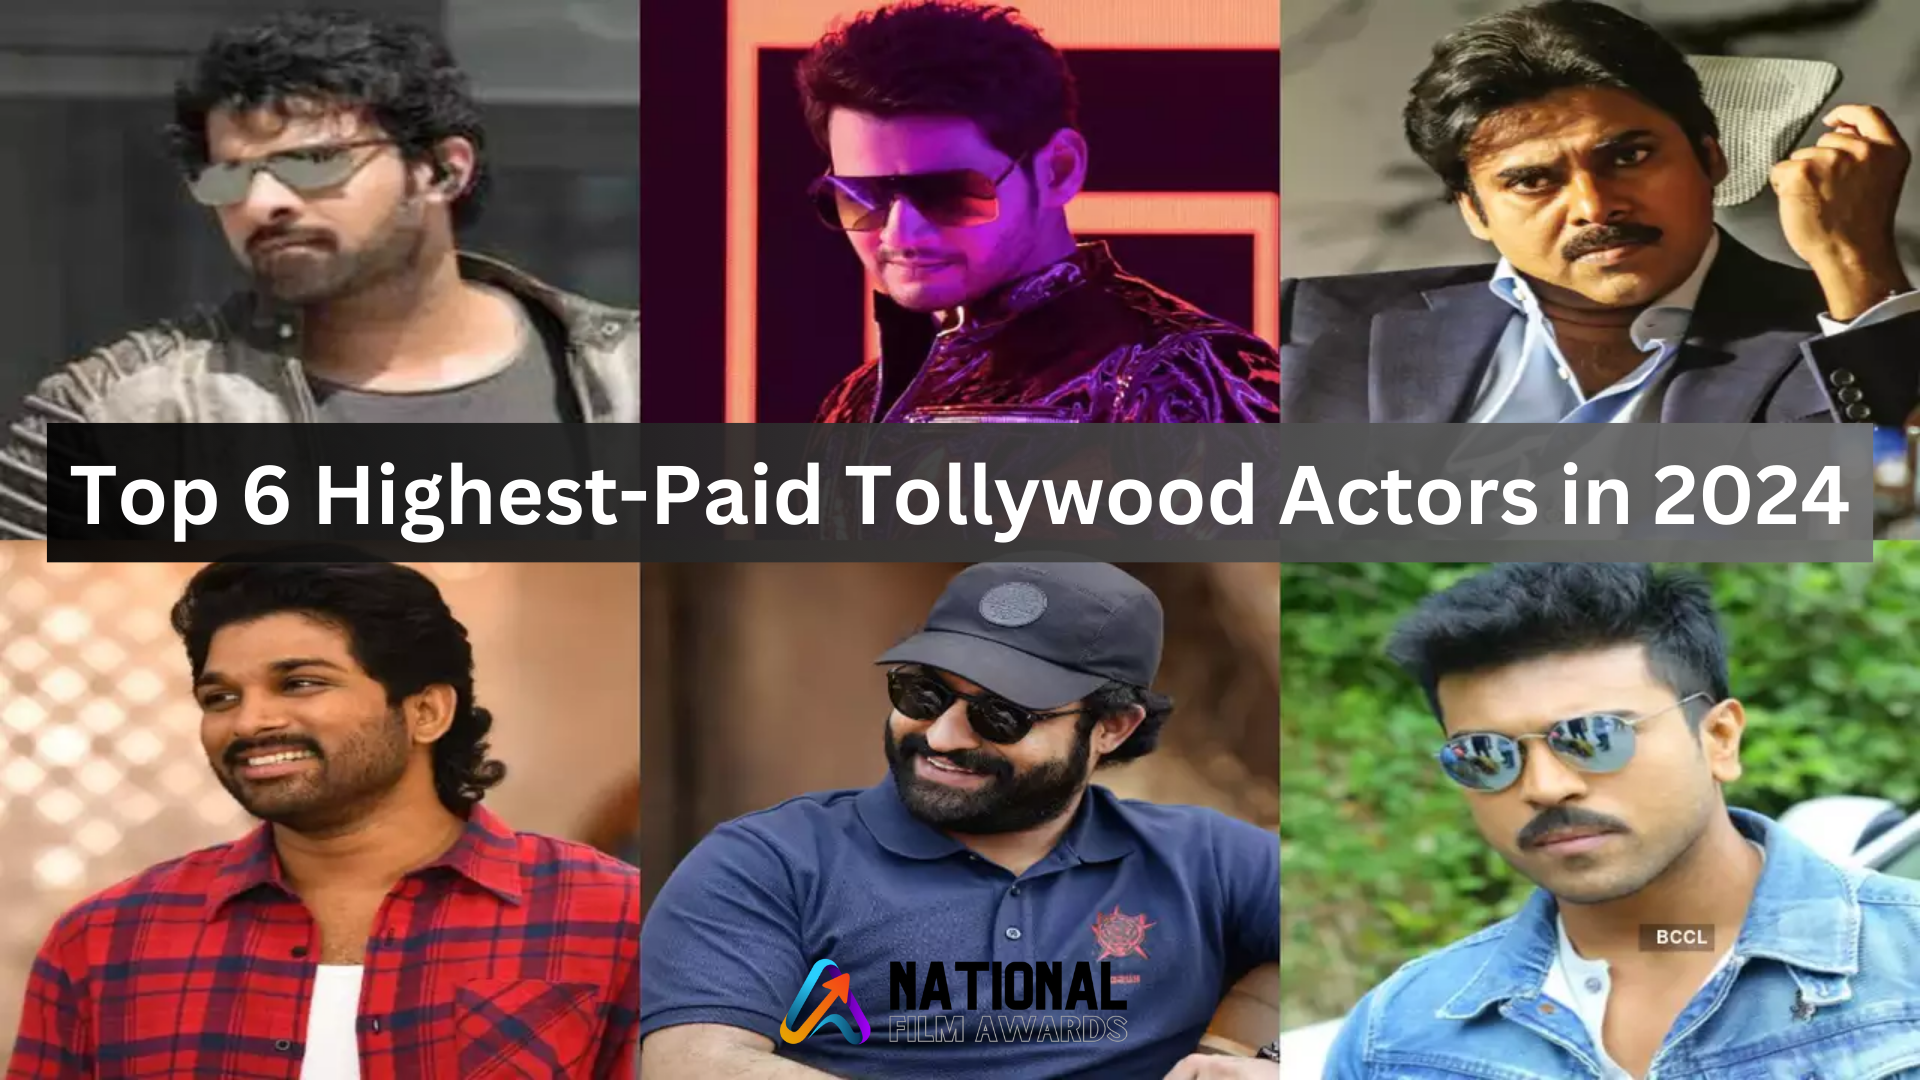 Top 6 Highest-Paid Tollywood Actors in 2024